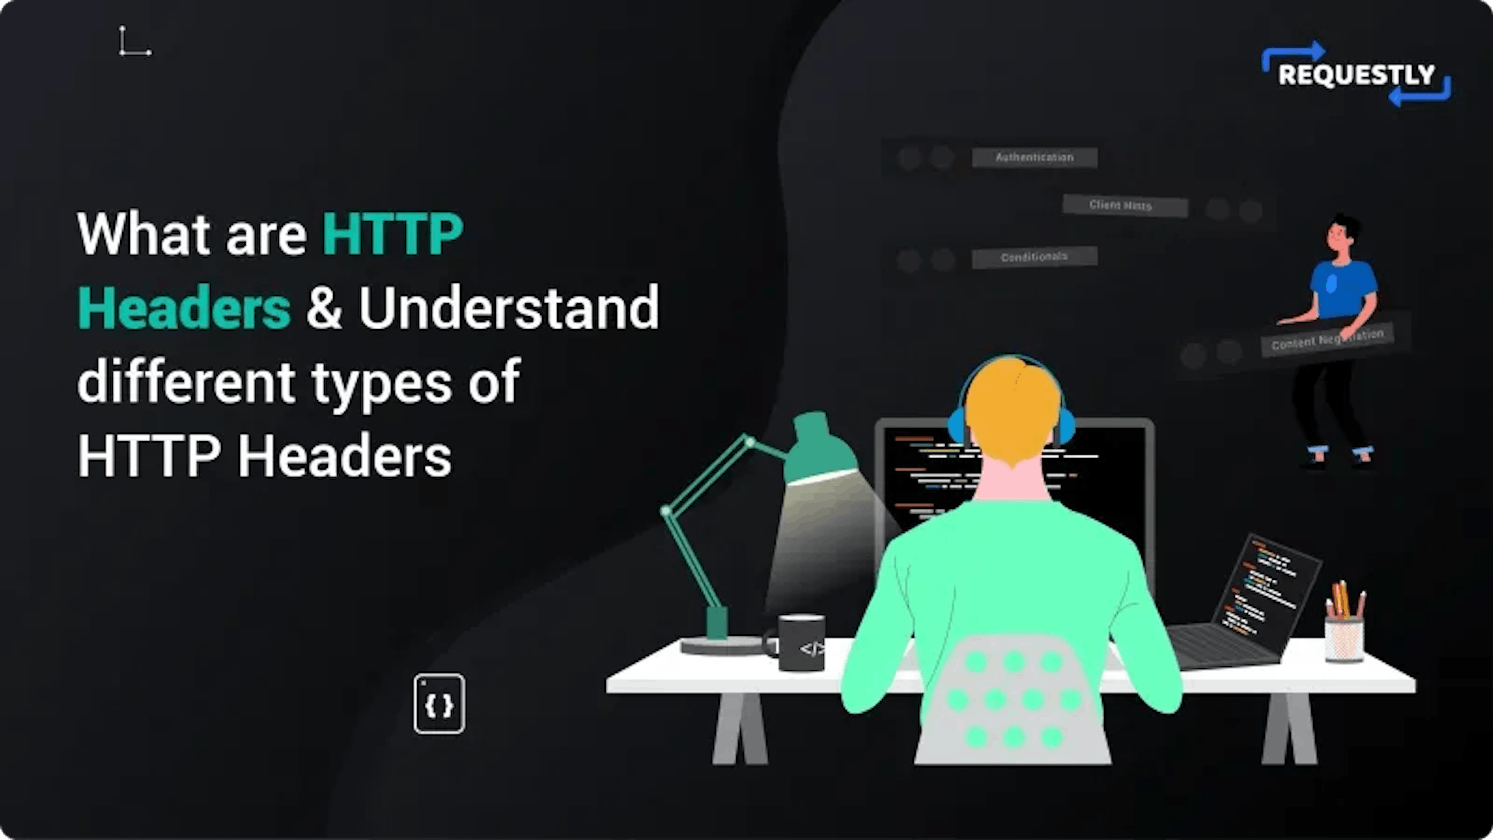 What are HTTP Headers & Understand different types of HTTP headers